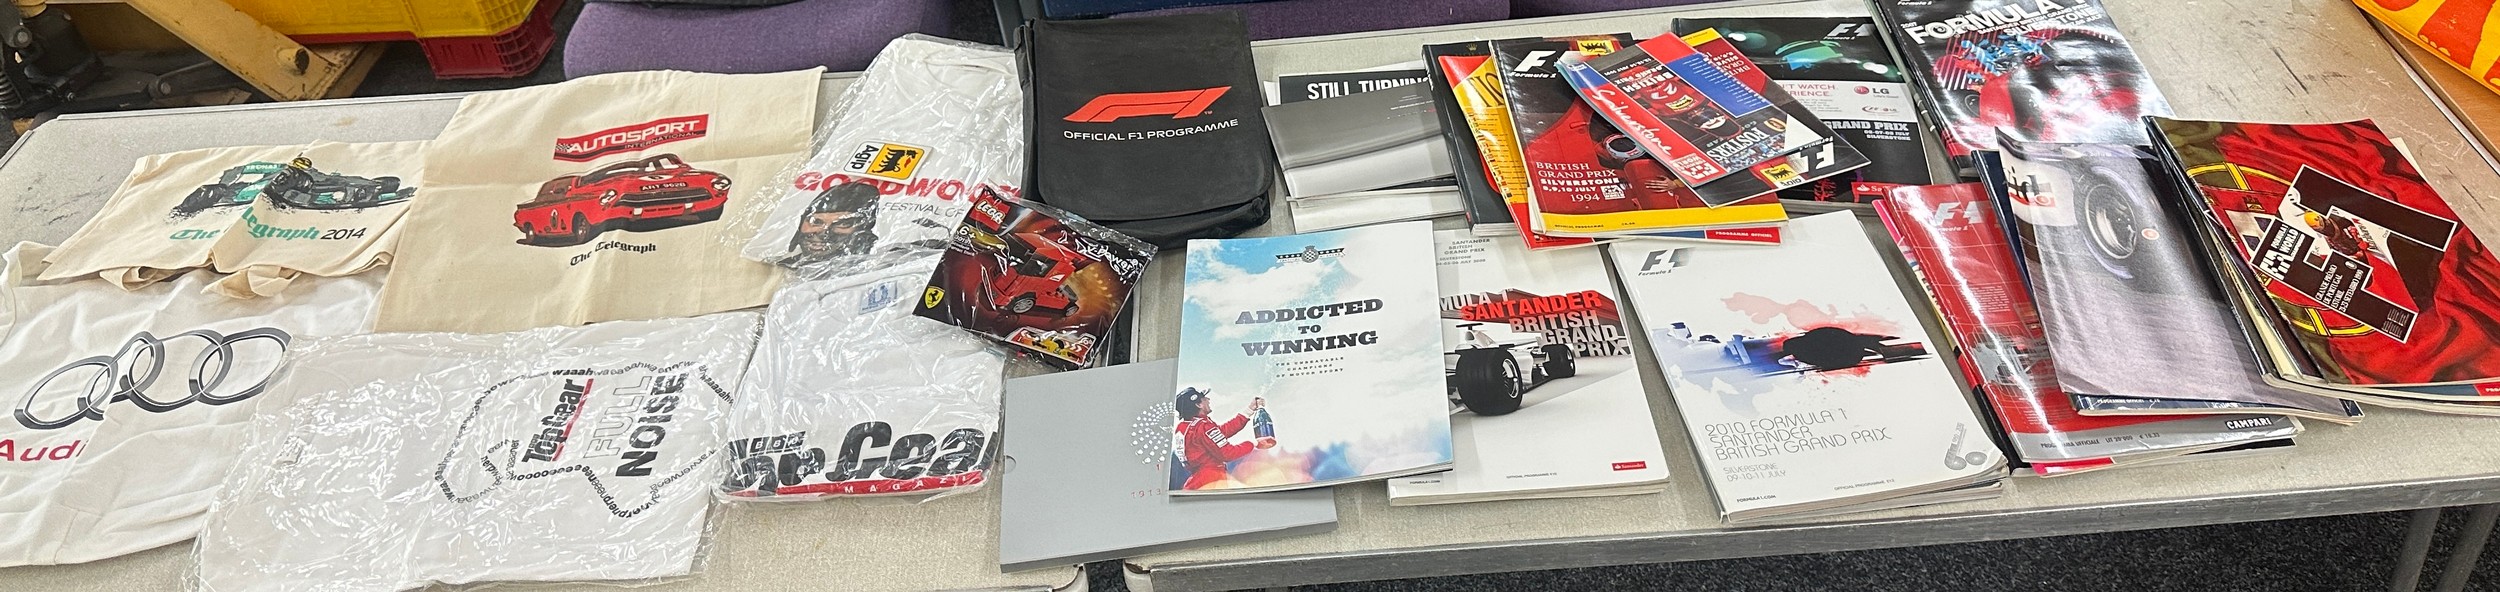 Selection of formula one memorabilia includes programmes, t shirt (un worn), France and Spain